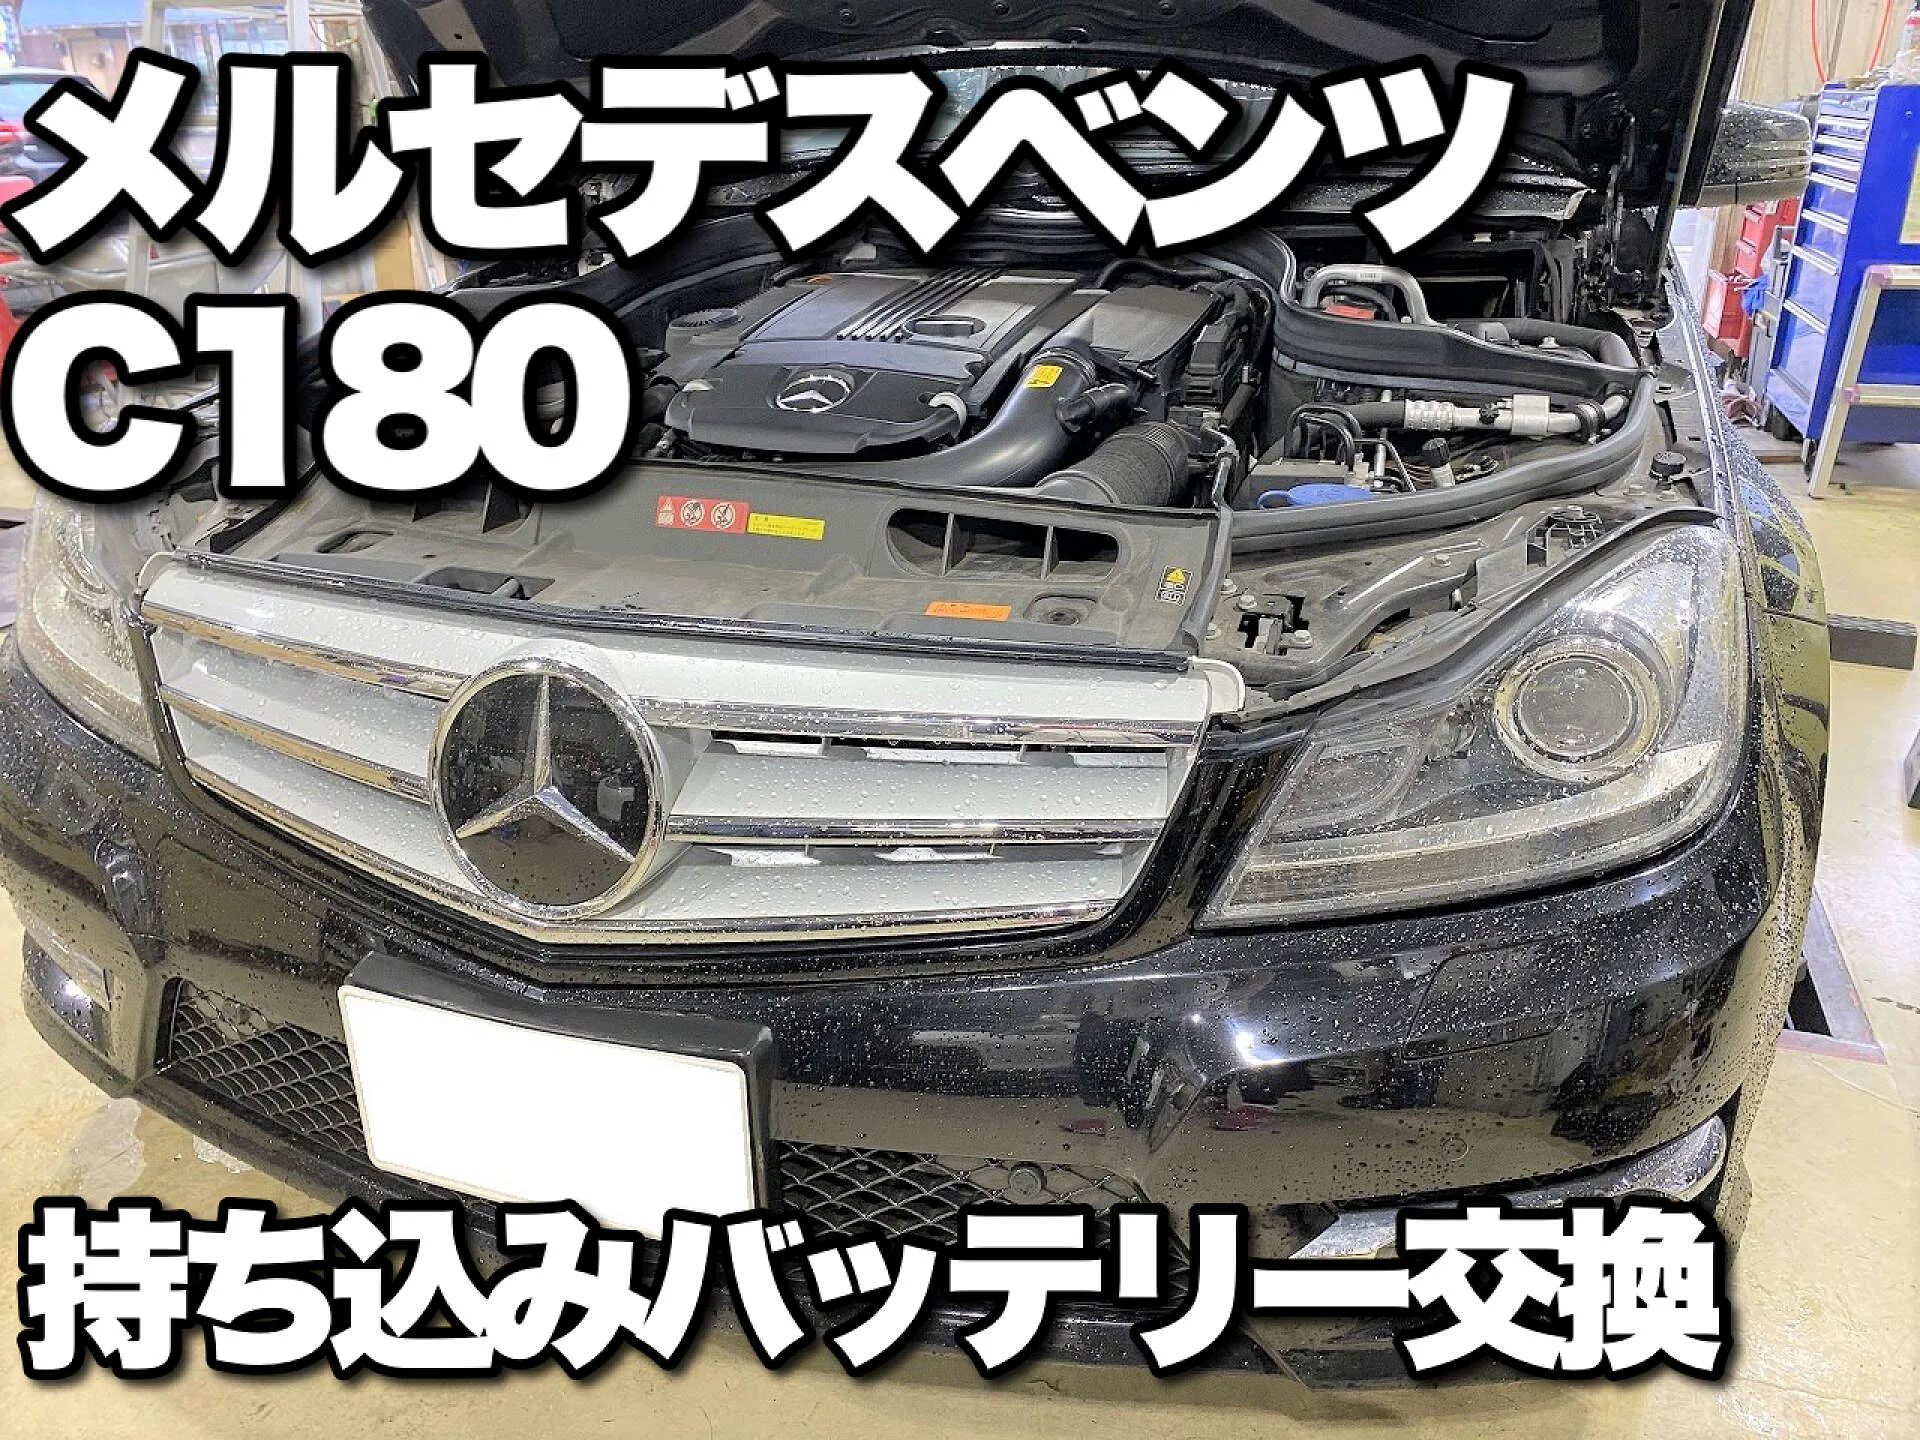 Mercedes-Benz ◎【必ず事前の適合確認をお願いします】ベンツ純正 バッテリー 100Ah【W219 CLSクラス】CLS350・CLS500・CLS55AMG